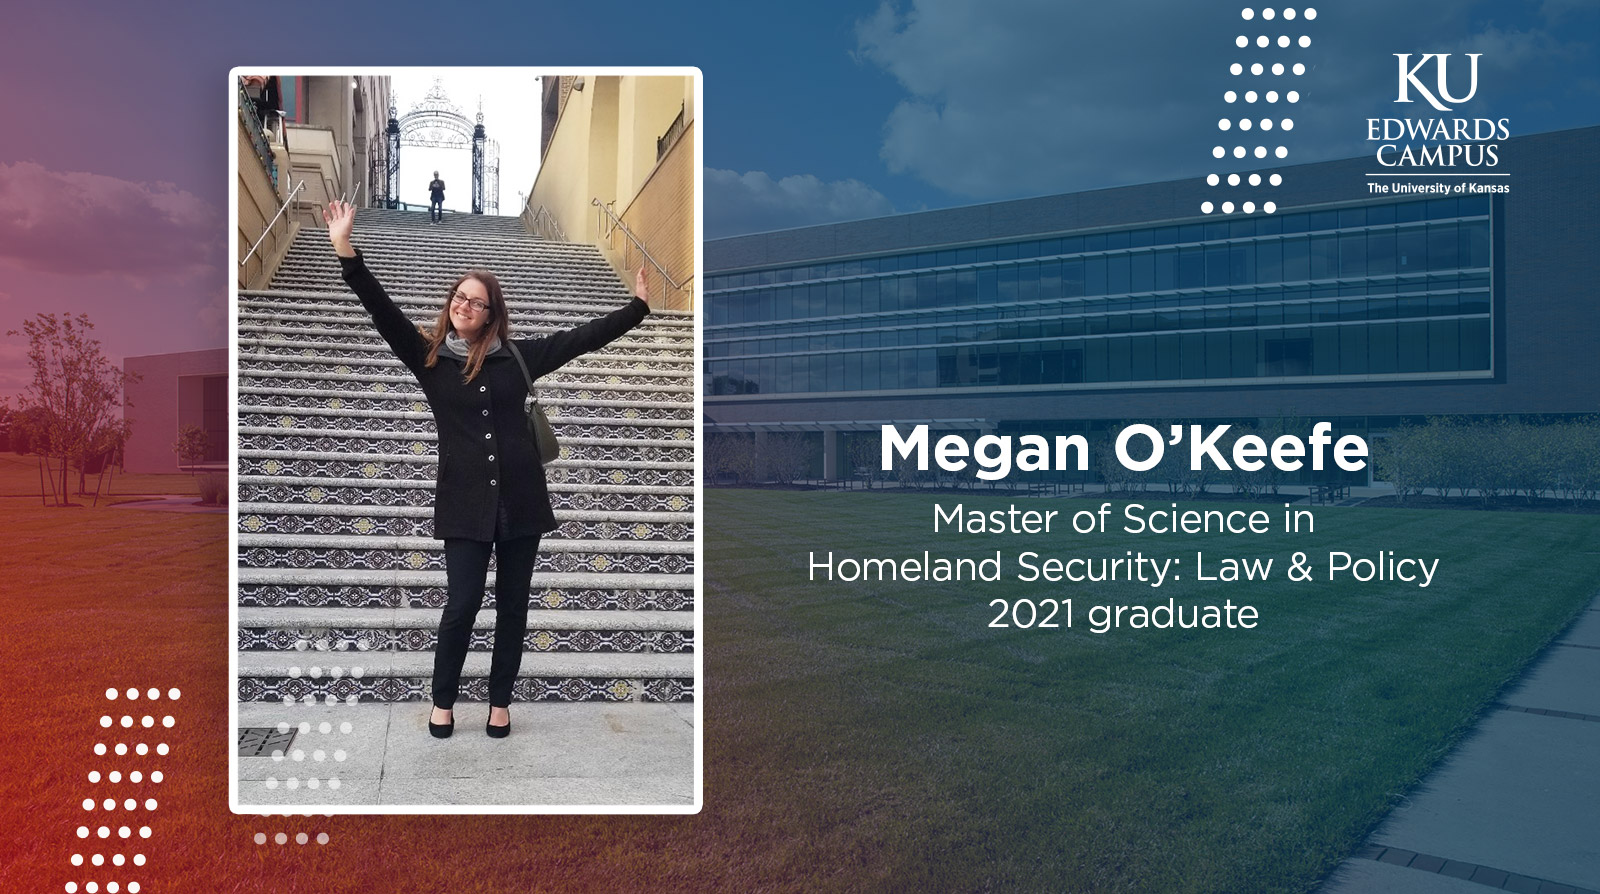 Megan O'Keefe, Master of Science in Homeland Security: Law & Policy 2021 graduate